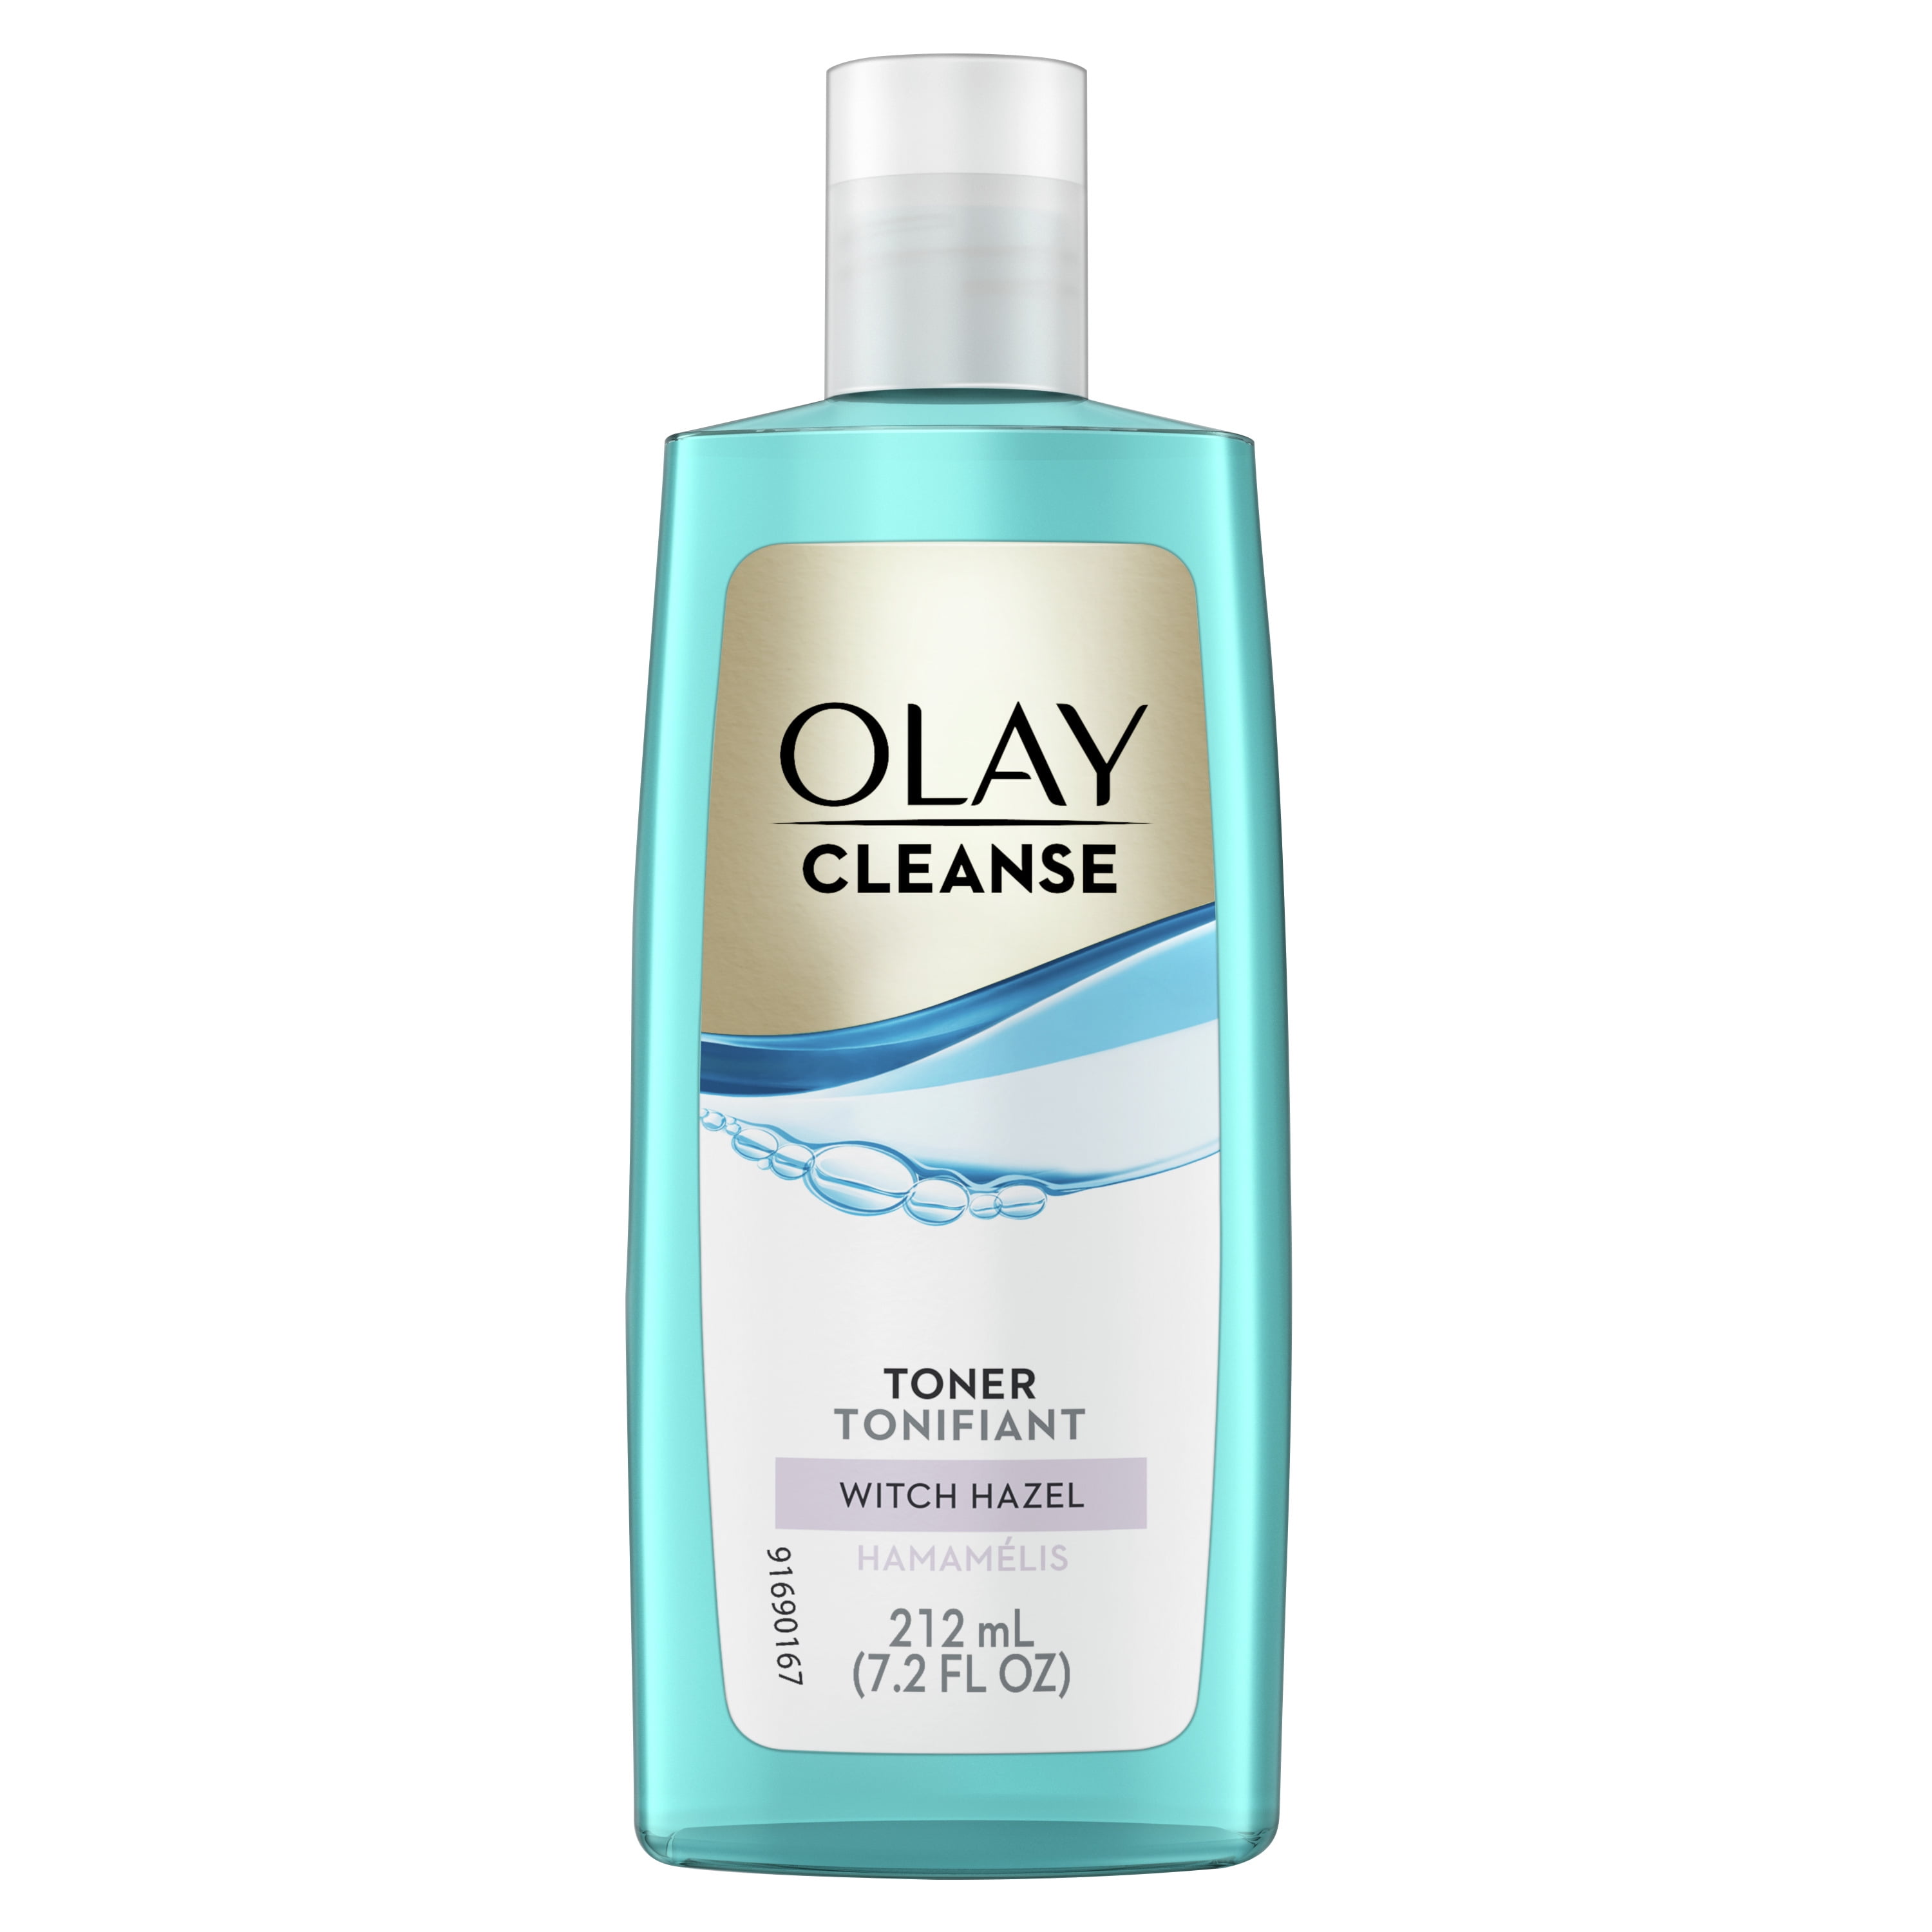 Olay Cleanse Witch Hazel Face Toner, Everyday Care for Combination and Oily Skin, 7.2 oz pic picture